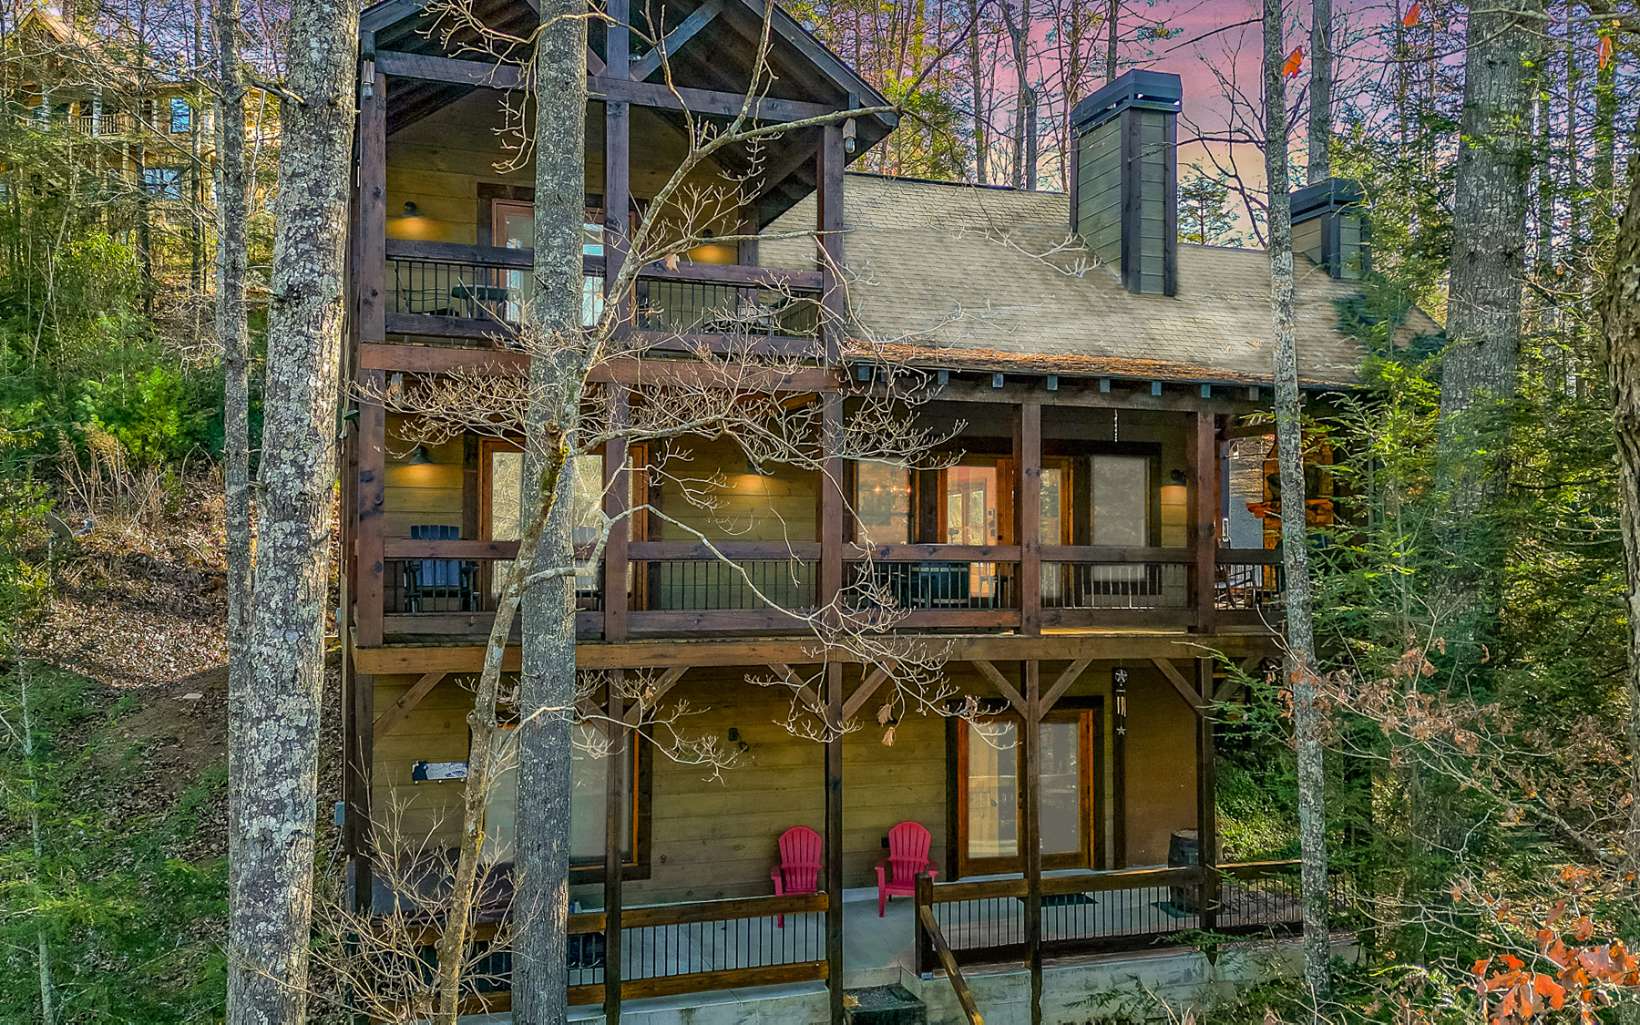 Lodge Style Rustic Retreat overlooking the rushing rapids of MOUNTAINTOWN CREEK! Prepare to be WOWED with direct creek frontage on a Designated Class A Trout Stream! You will love the massive post & beam covered porches, party porch with outdoor fireplace, observation deck & fire pit area near the water's edge. This 4BR/3.5BA plus LOFT is like new and full of character! Selling Mostly FURNISHED.Handcrafted finishes throughout this cabin with great room, soaring cathedral ceiling, timber beams, beautiful stone fireplace (wood burning), blue buggy wood & live edge wood accents. Well appointed kitchen, half bath & dining area. Master & laundry conveniently located on main. Huge LOFT plus 2 bedrooms & bath on upper level. Full finished terrace level has a family room, bed & bath and doors open to terrace patio complete with hot tub. There's also an outbuilding, great storage for all your fishing rods, kayaks & river gear. Perfect for full time, vacation home or will make a great vacation rental investment. Located in popular river resort with amenities galore!